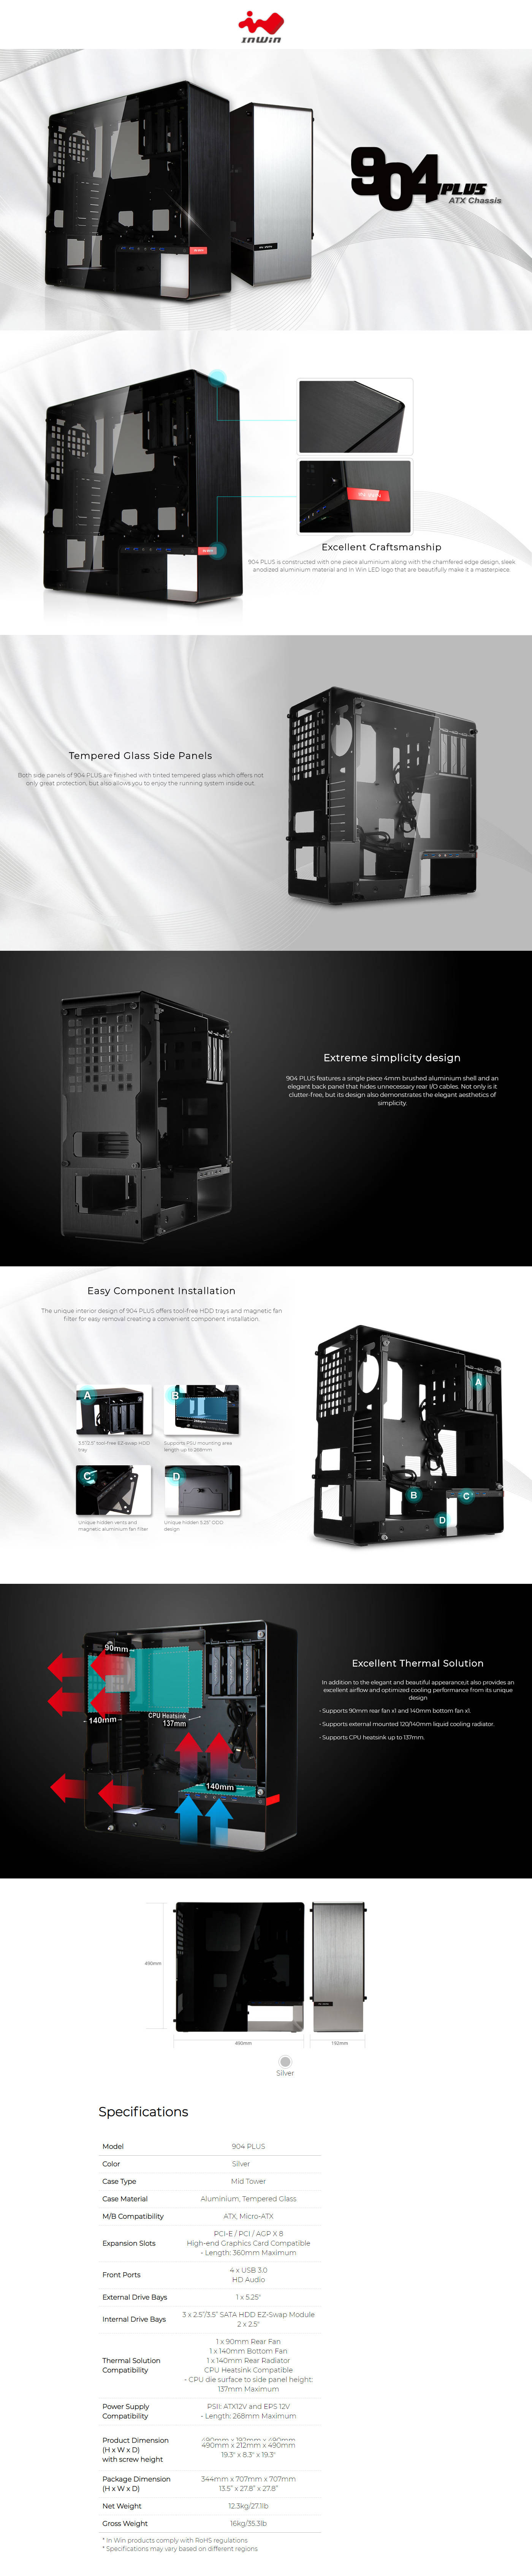 Buy Online InWin 904 Plus Mid Tower Chassis - Silver